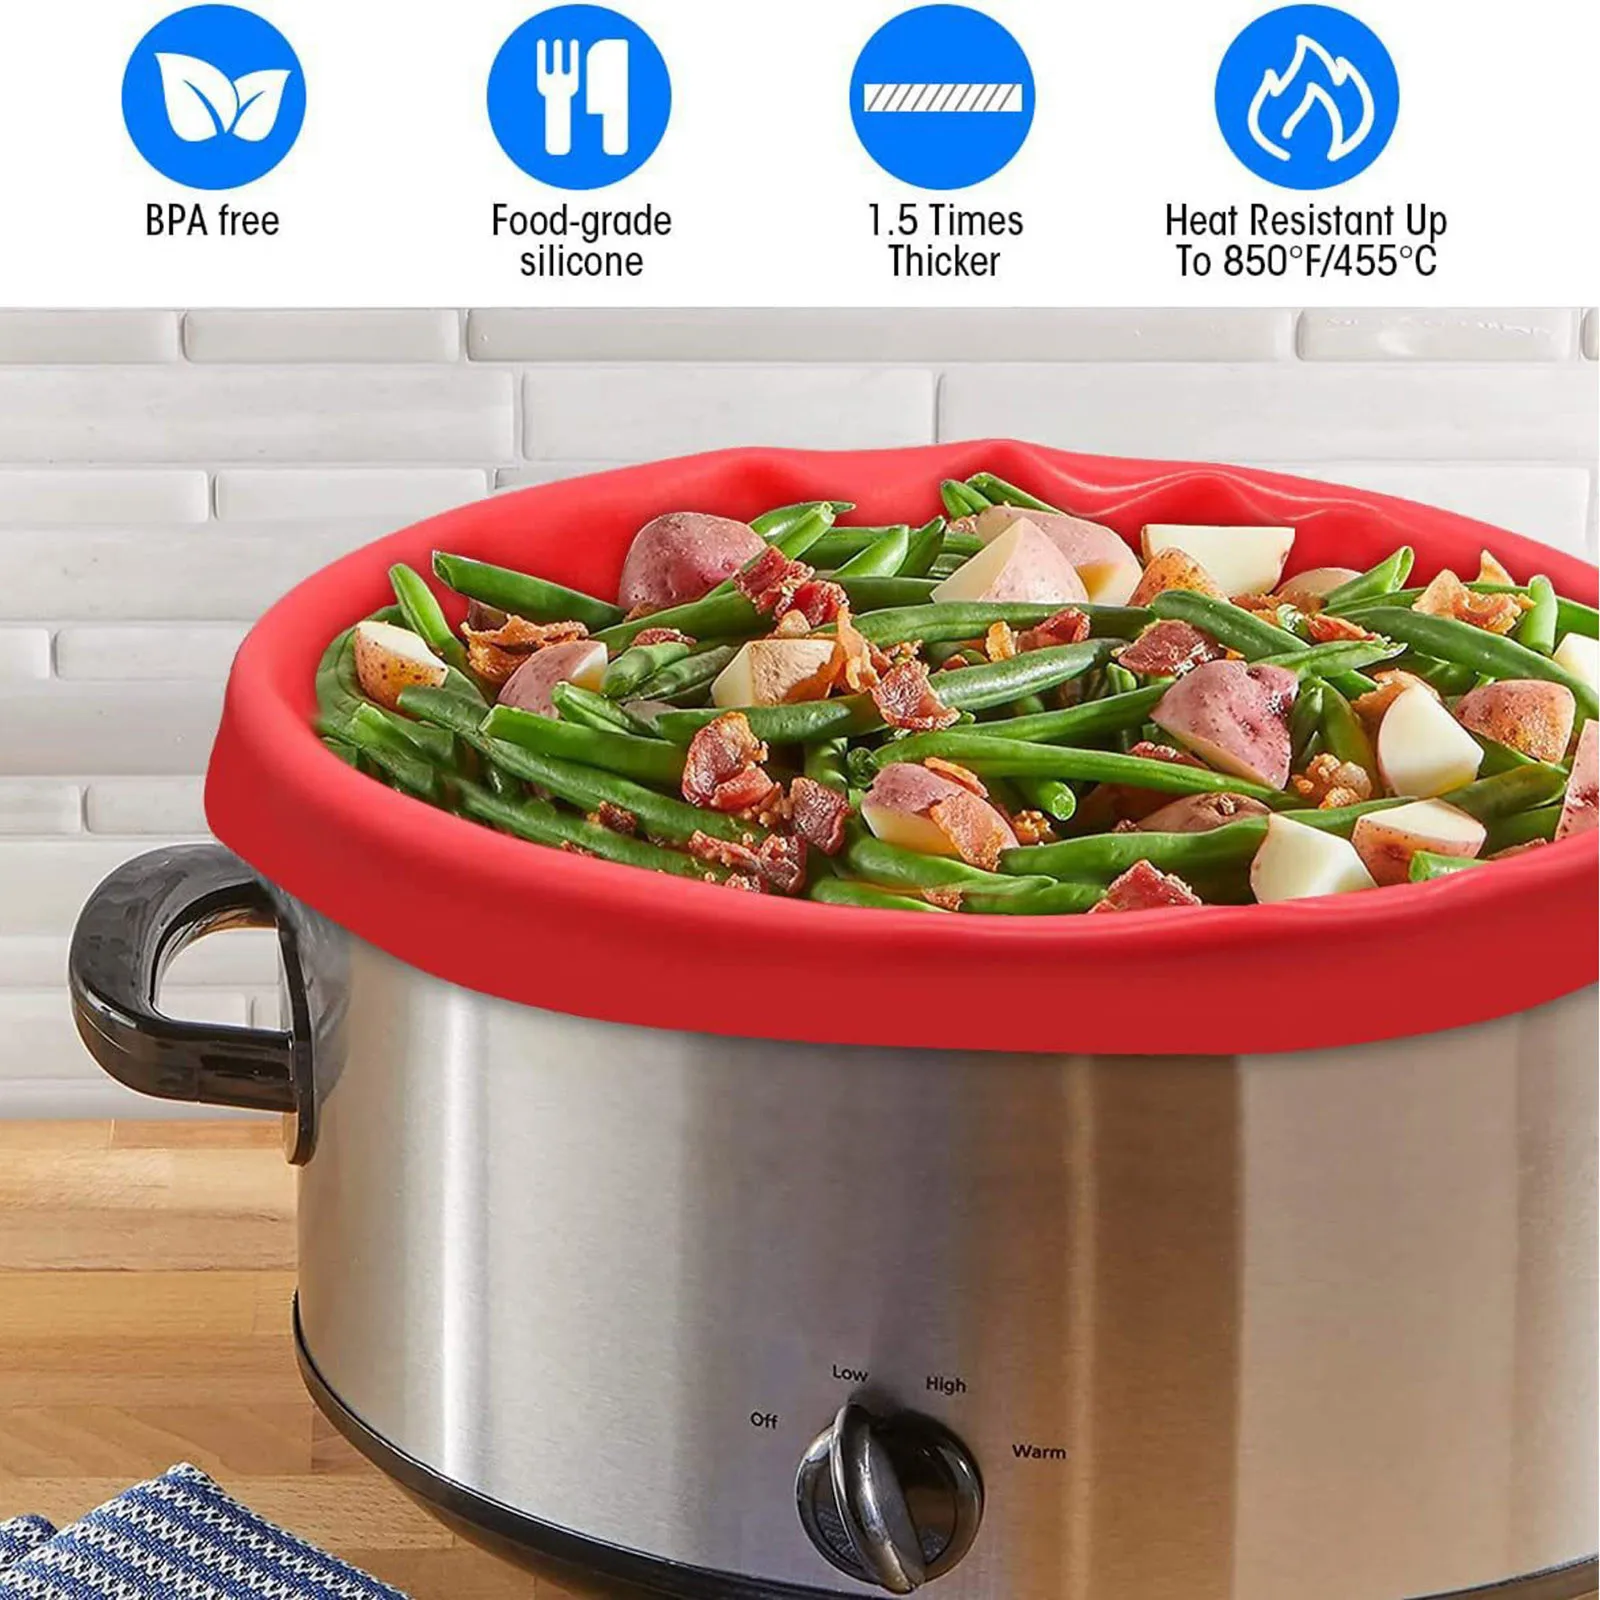 https://ae01.alicdn.com/kf/Sfcefadfaed4747b3ac18f5cb6772ba79e/Slow-Cooker-Liners-Reusable-Crock-Pot-Liner-Leakproof-Fryer-Tray-Replacement-Square-Air-Fryer-Tray-for.jpg